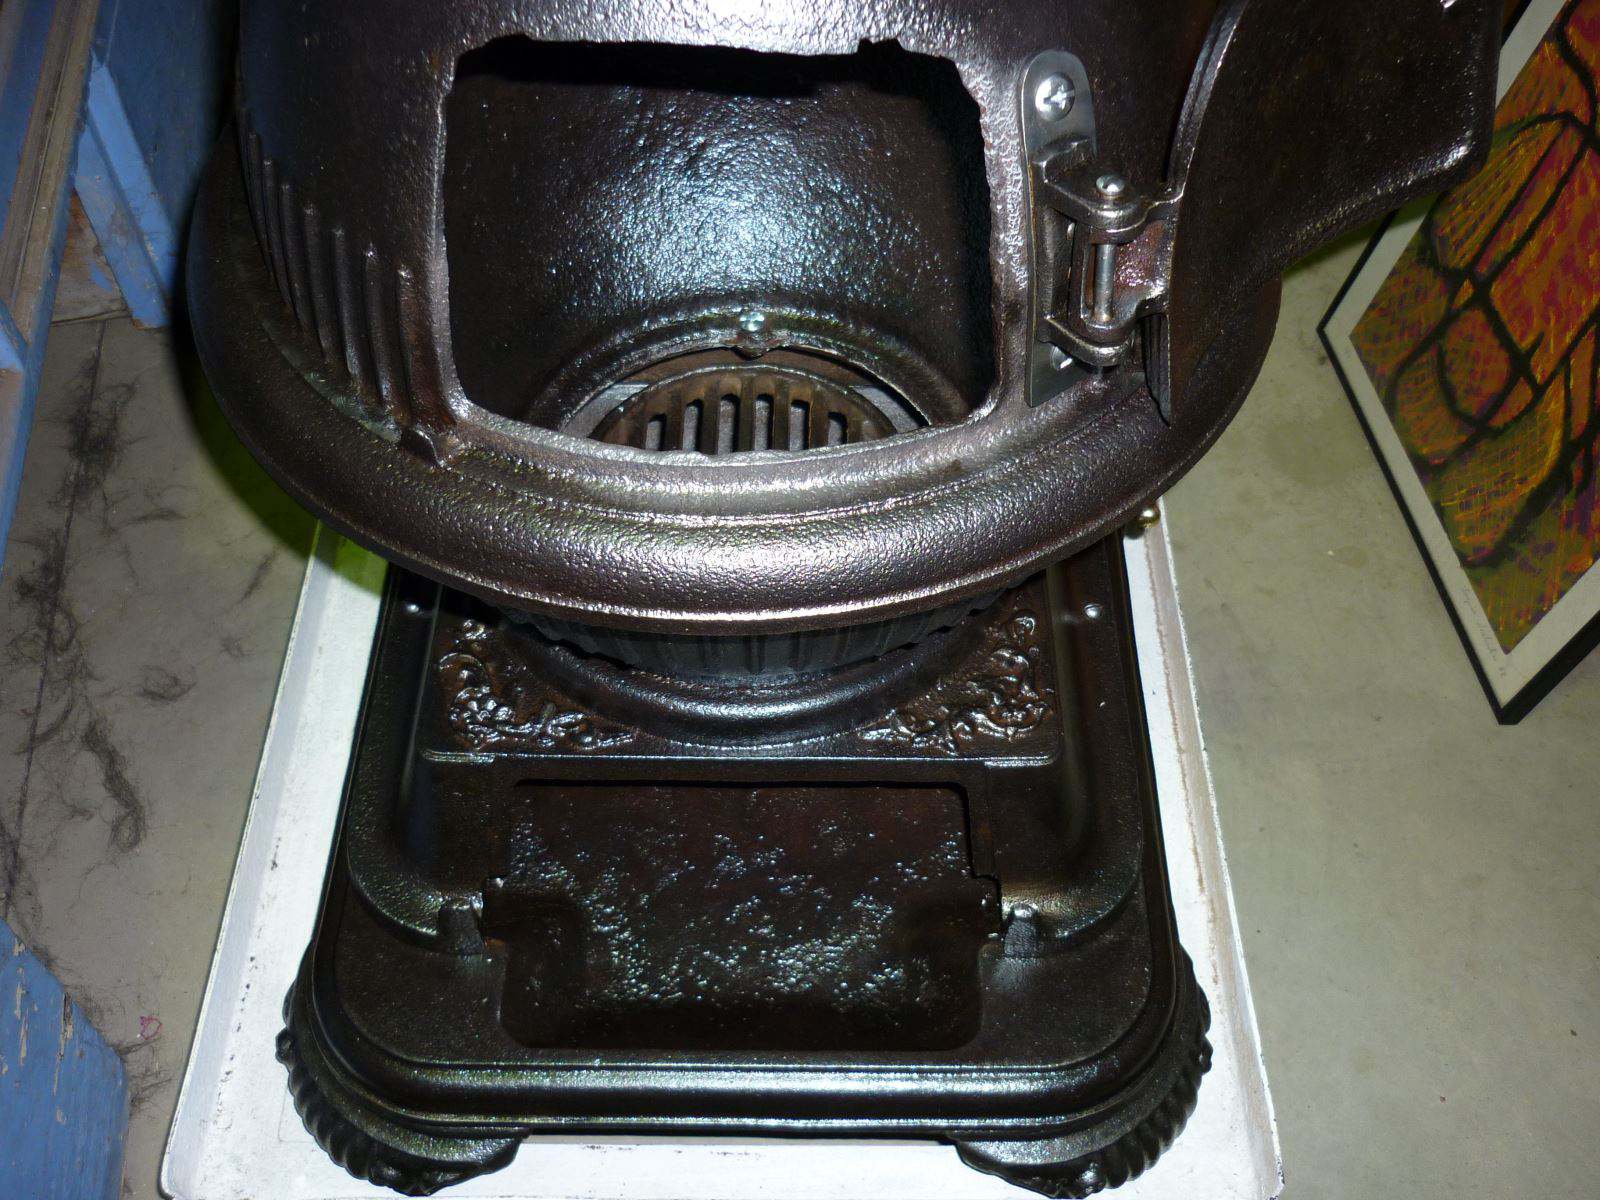 Pot Belly Stove. Repaired, Restored & Excellent Working Order